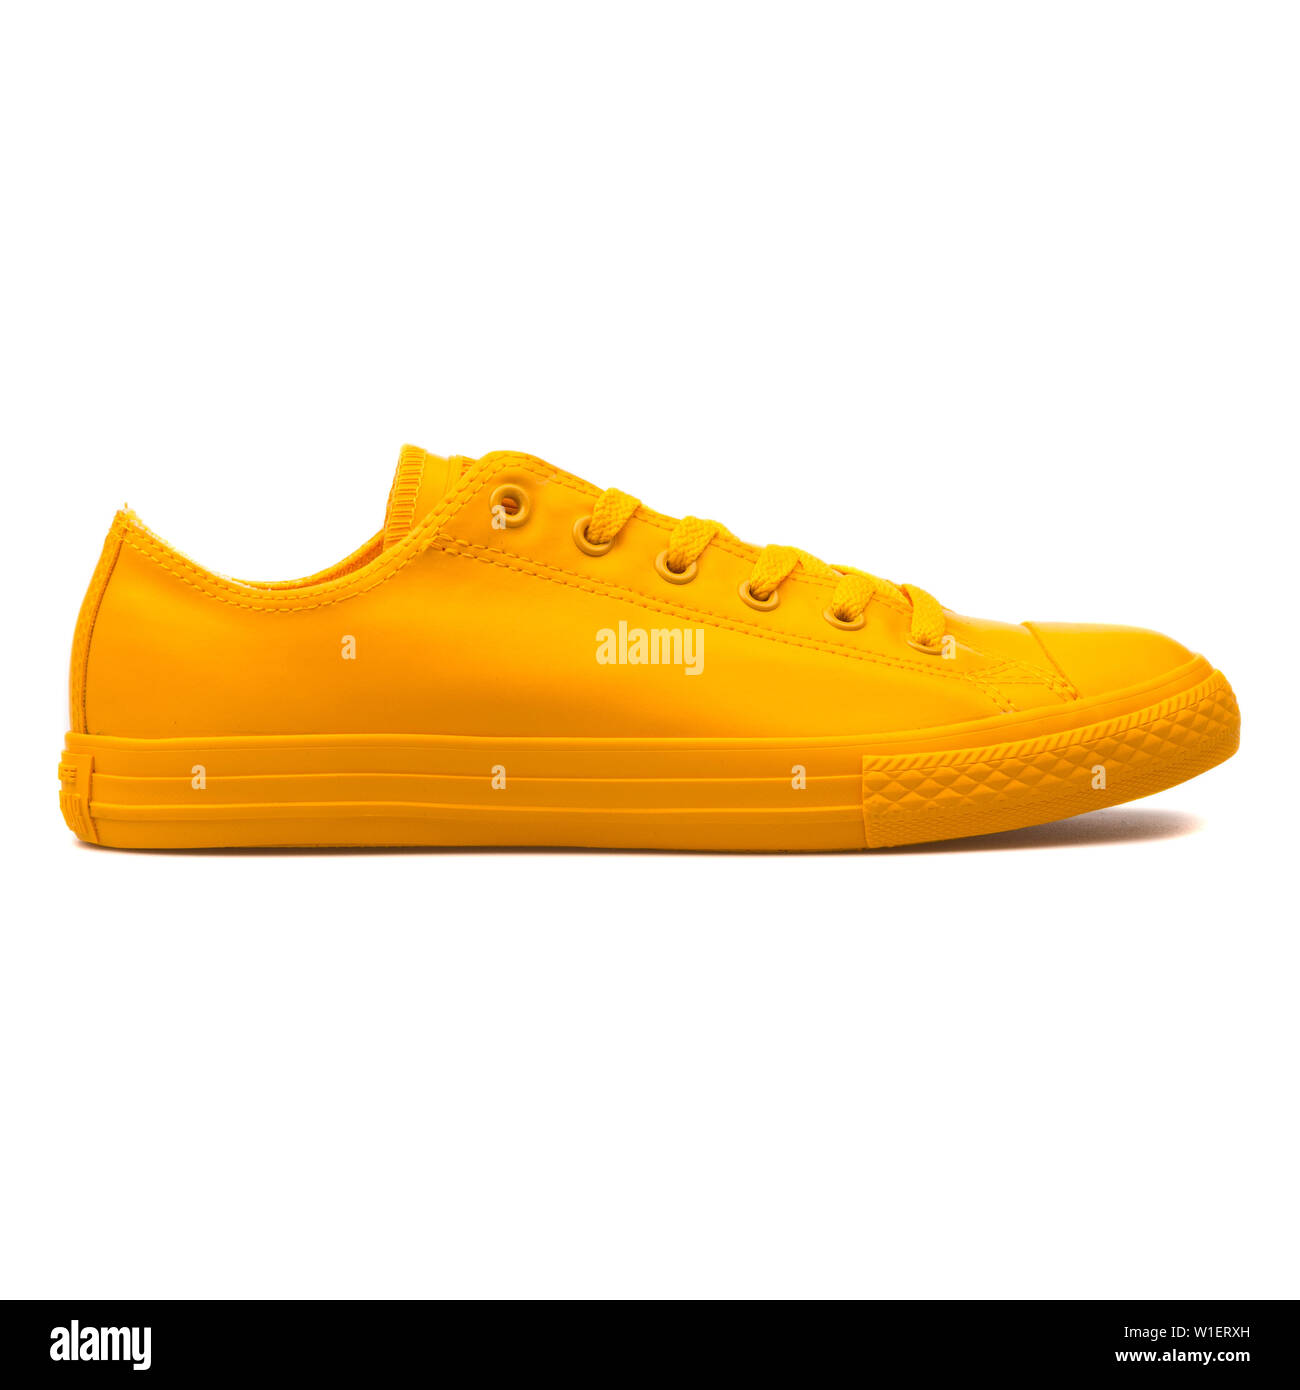 VIENNA, AUSTRIA - AUGUST 10, 2017: Converse Chuck Taylor All Star Rubber OX  Honey yellow sneaker on white background Stock Photo - Alamy